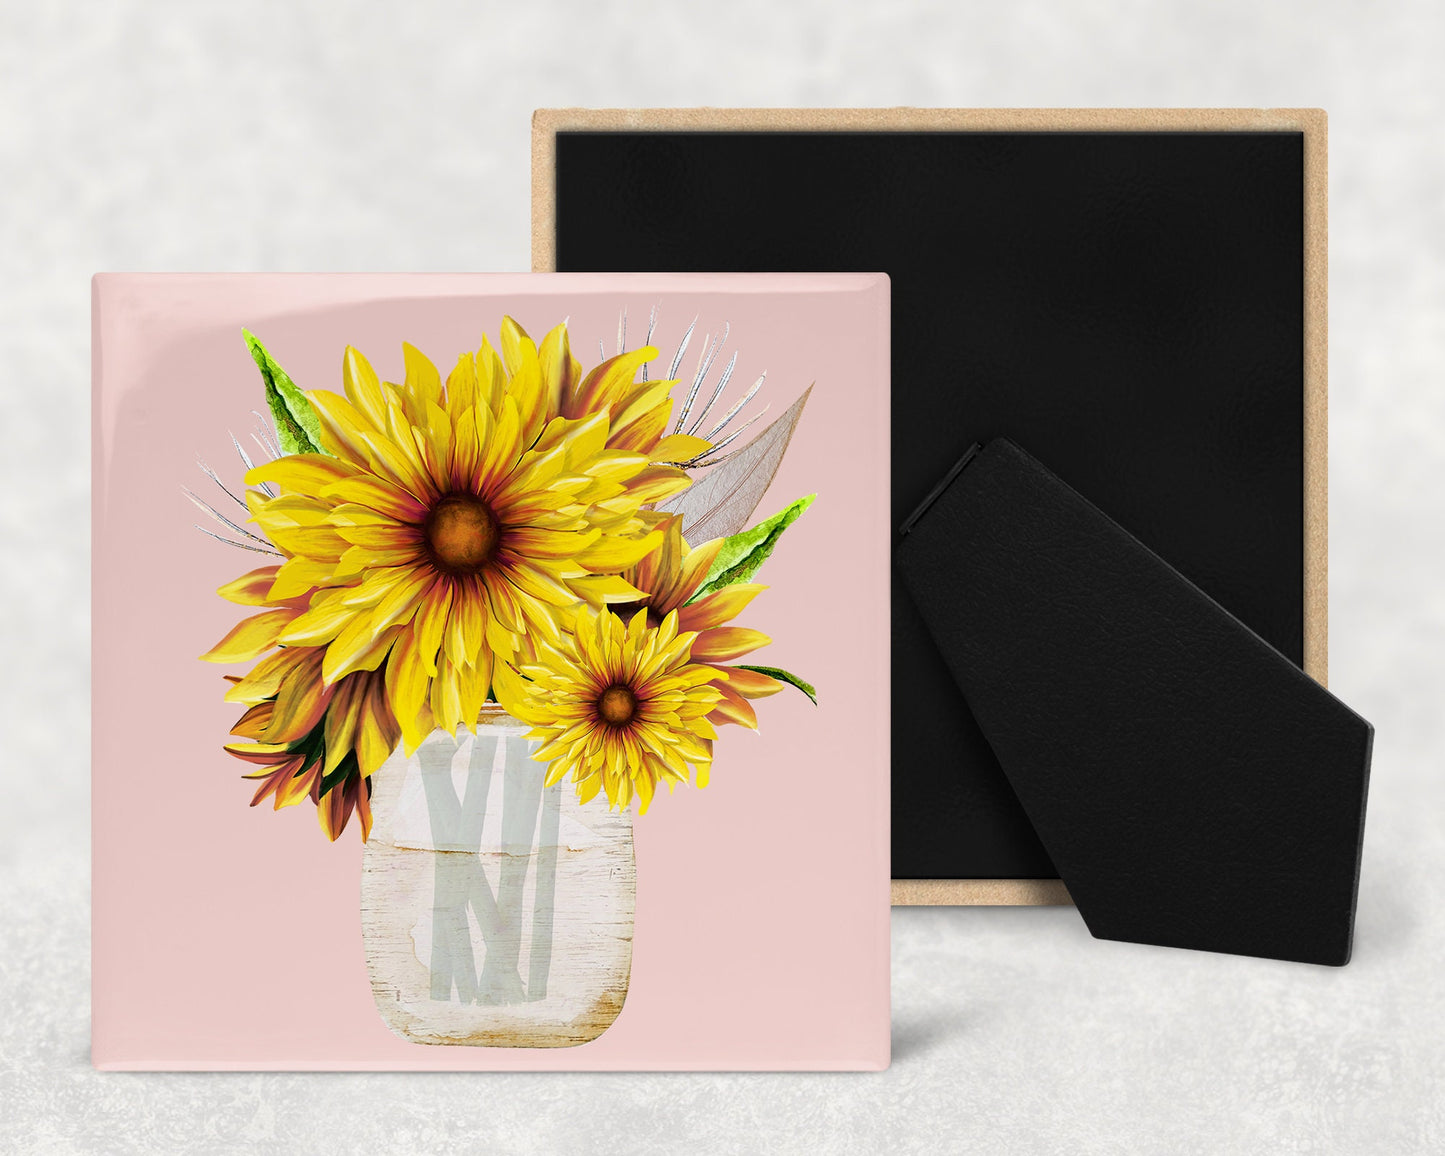 Sunflowers in a Jar Art Decorative Ceramic Tile with Optional Easel Back - Available in 3 Sizes